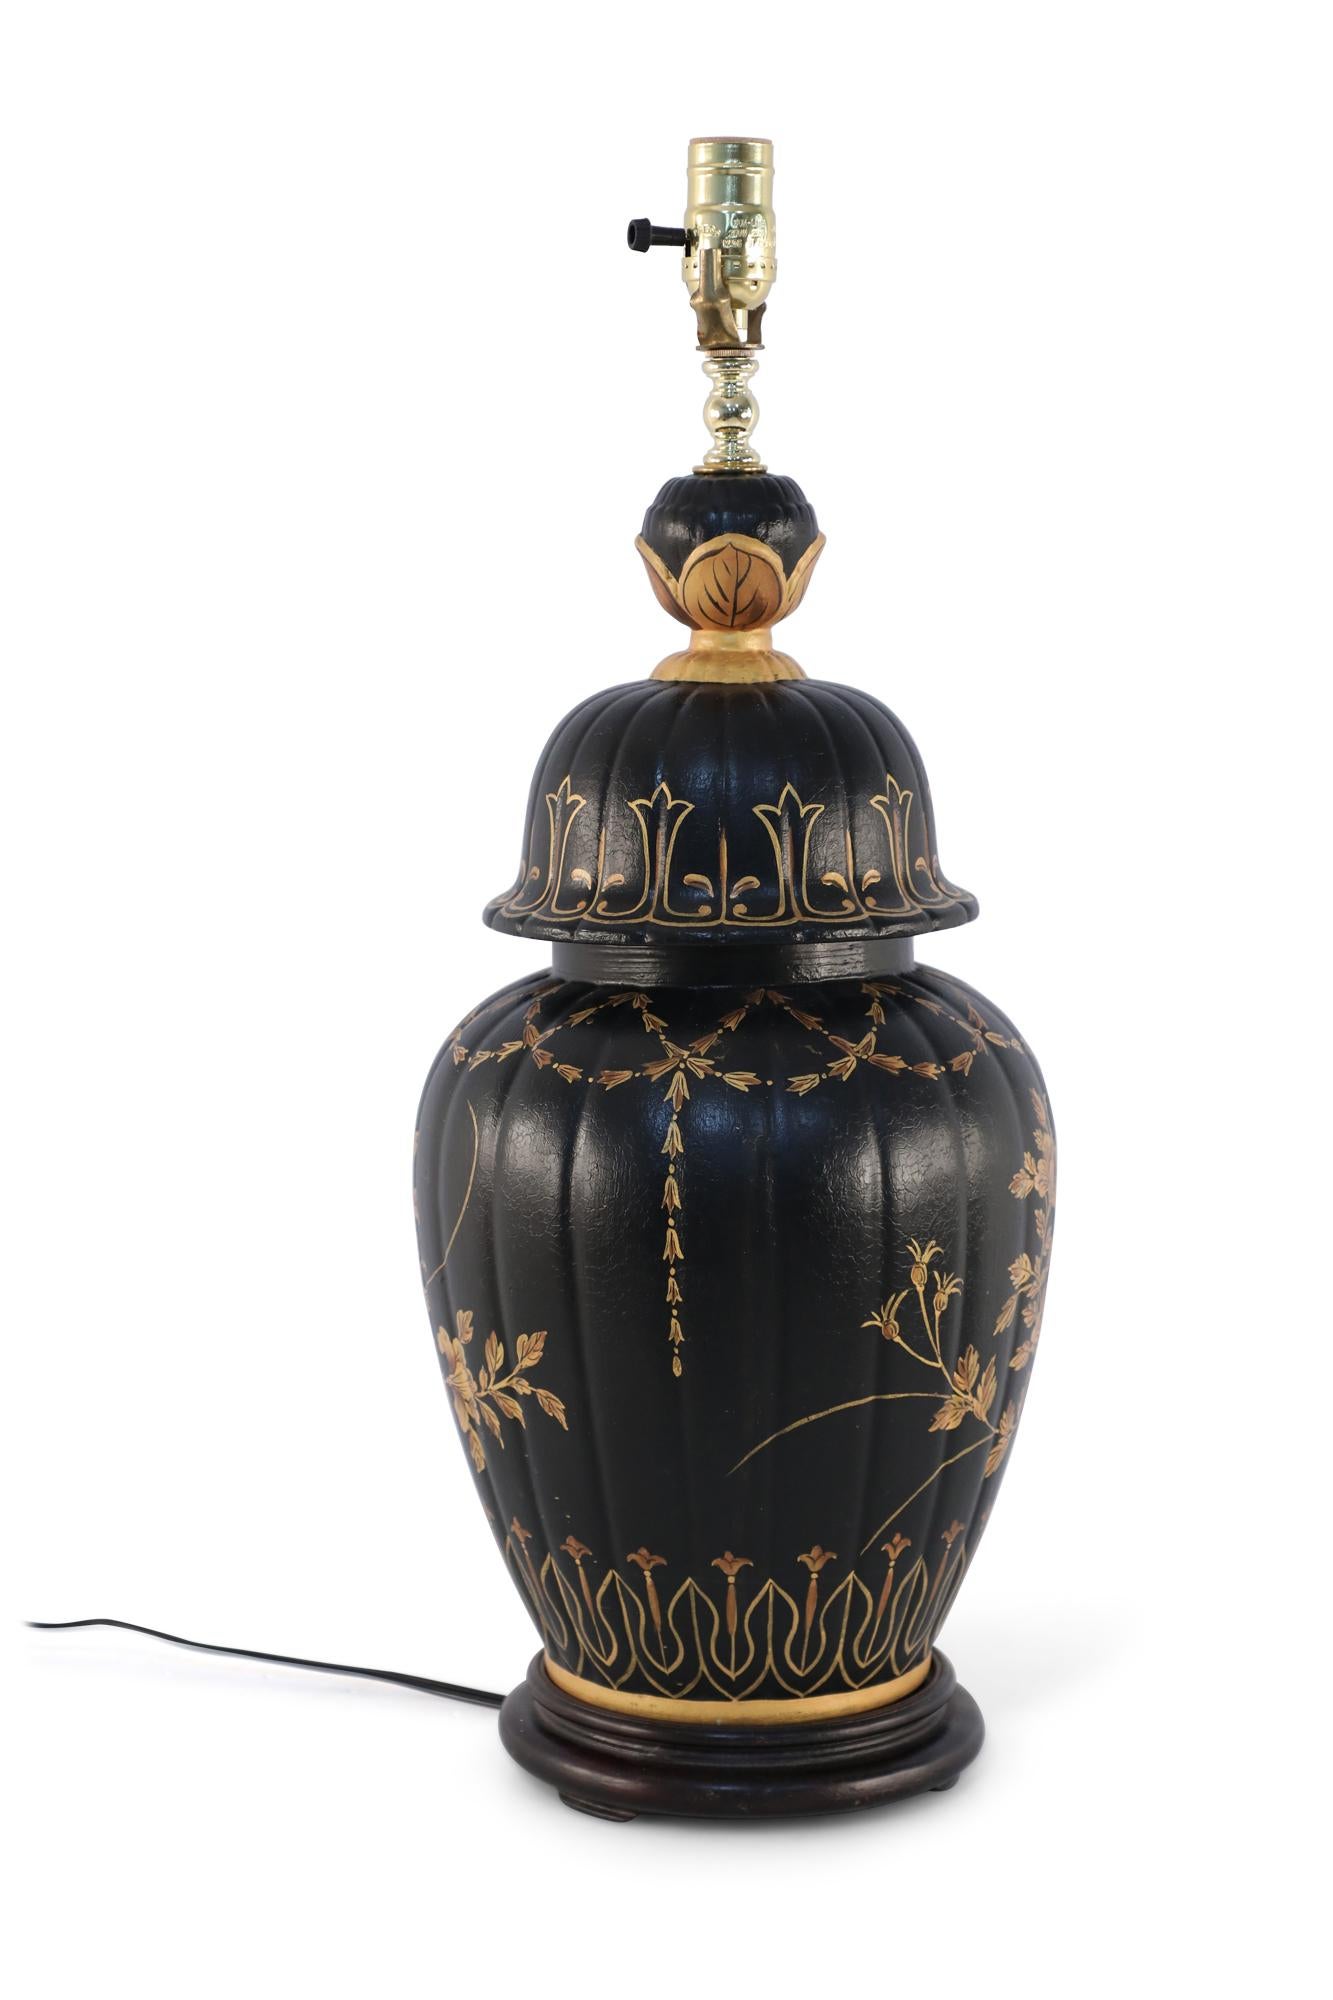 Chinese Regency Style Black and Gold Floral Lidded Urn Porcelain Table Lamp In Good Condition For Sale In New York, NY